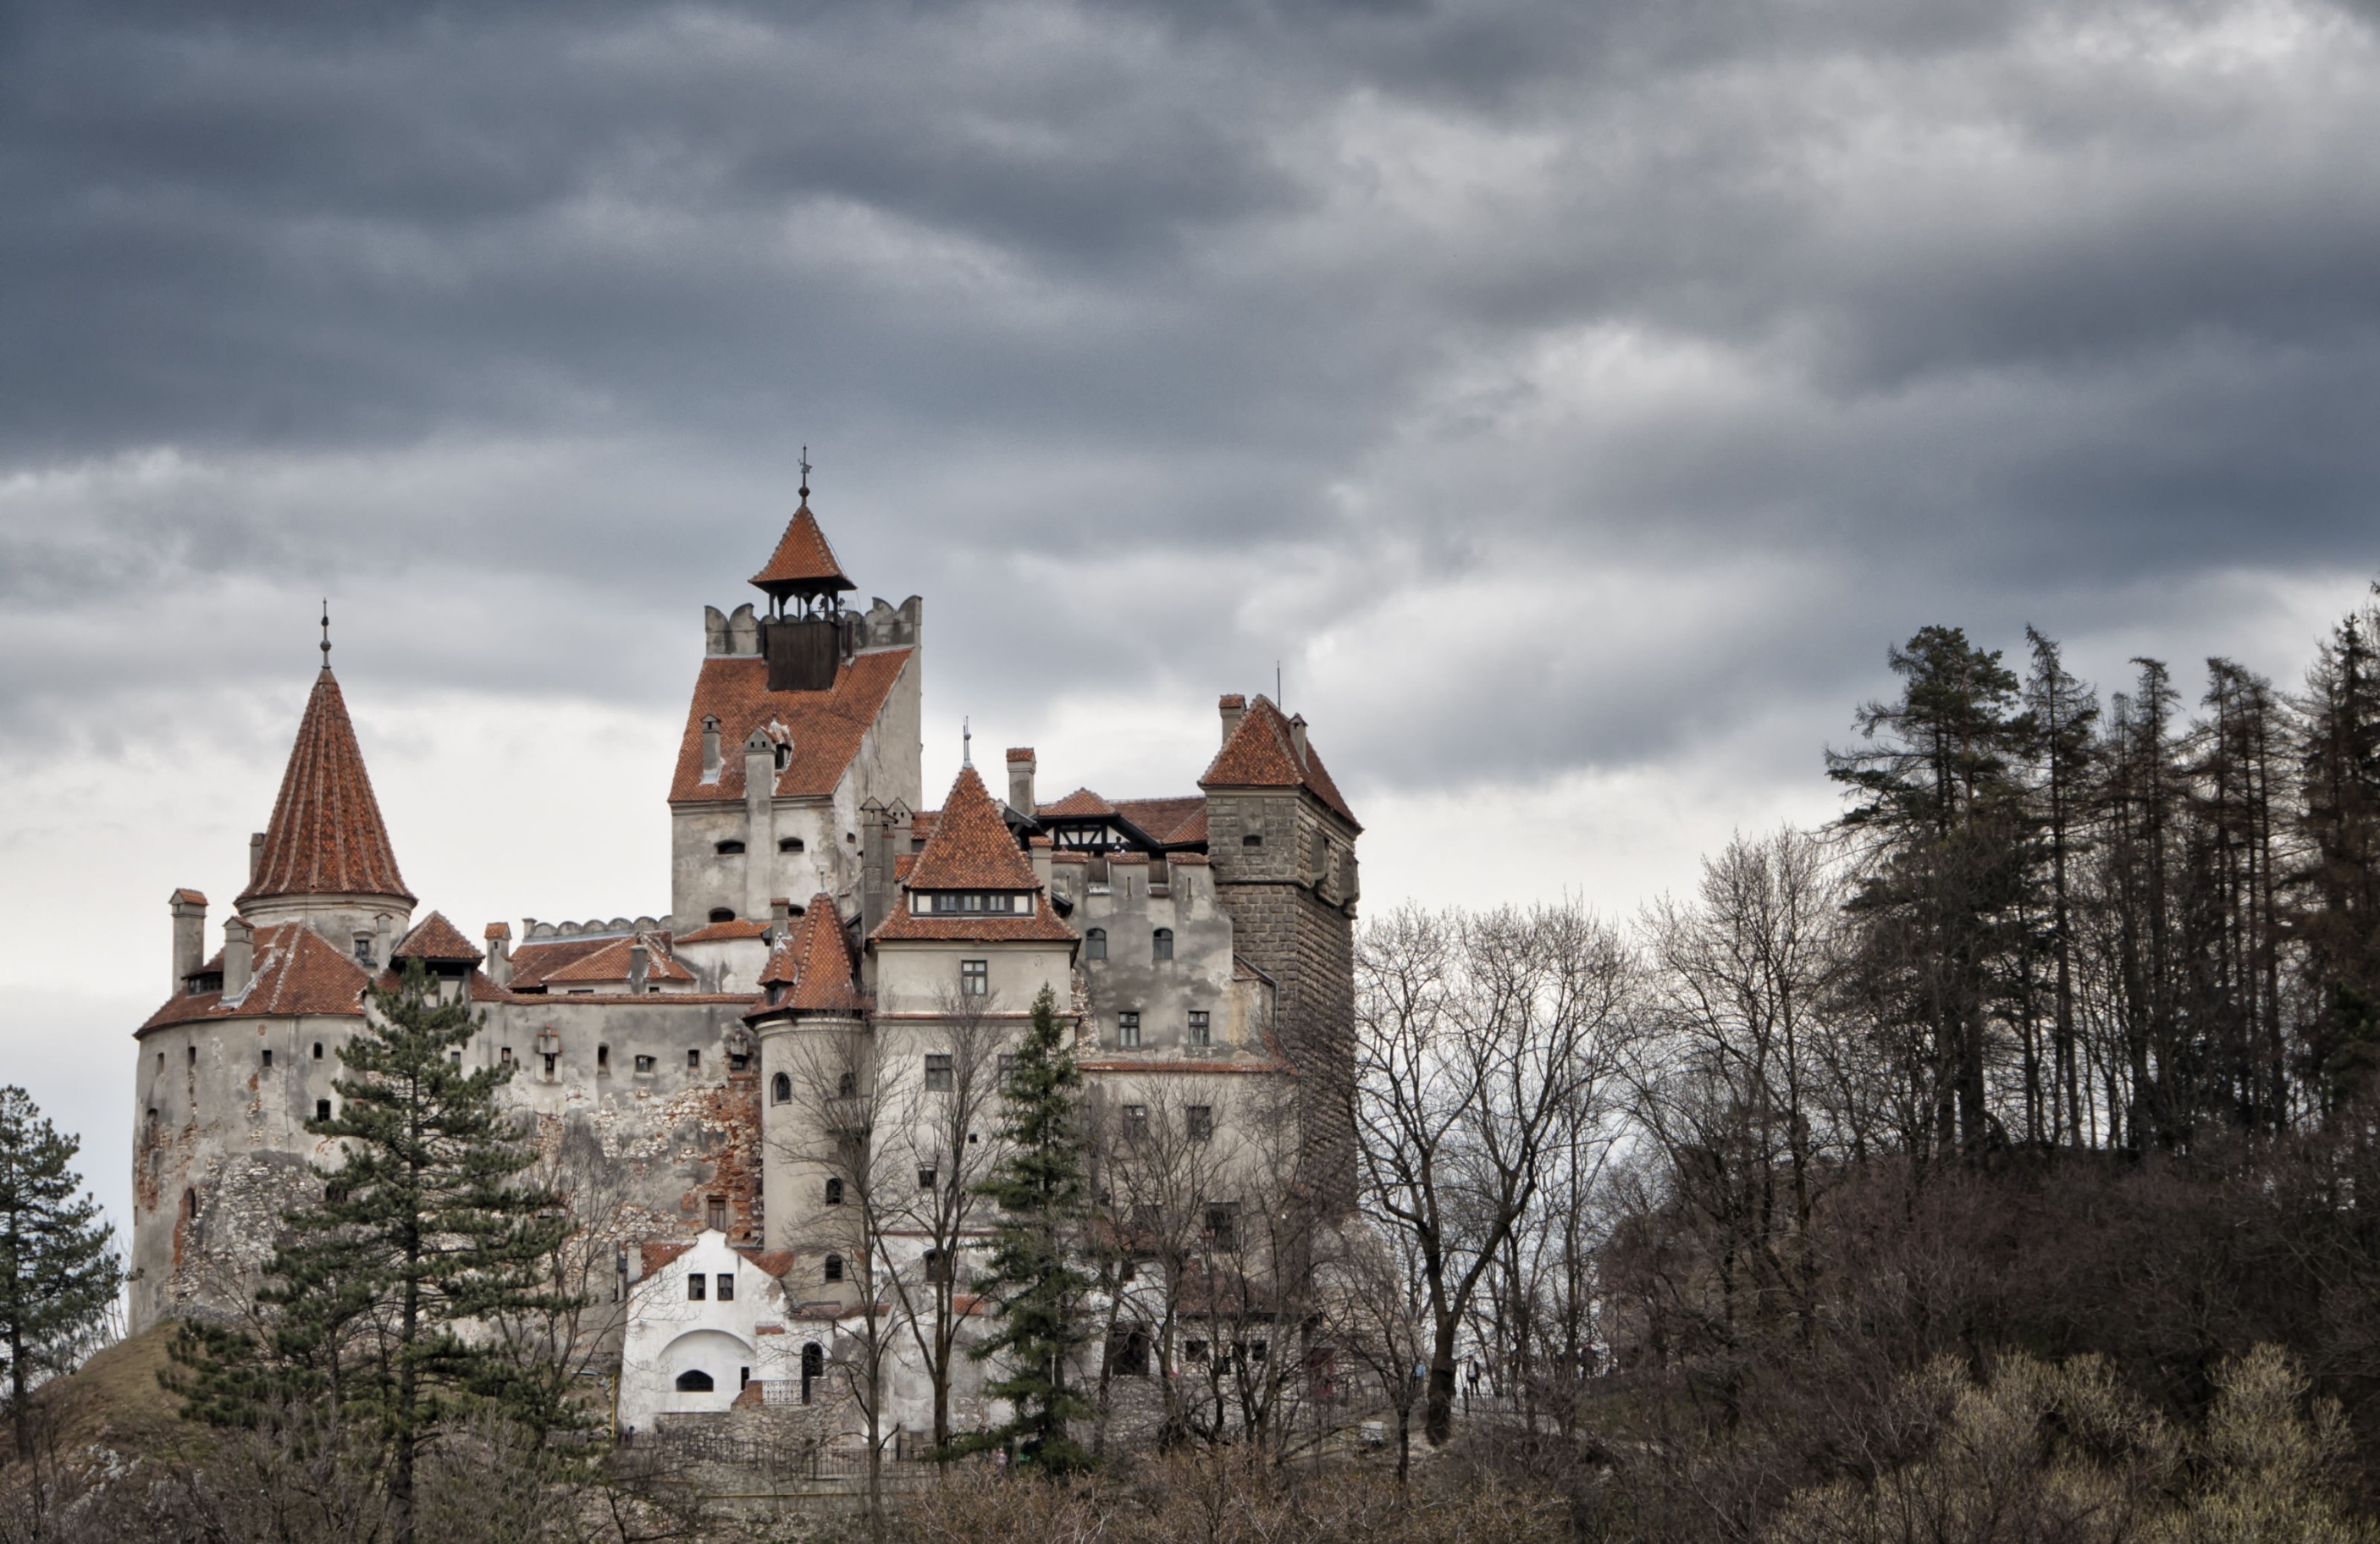 Would You Pay 66 Million For Count Dracula's Castle?